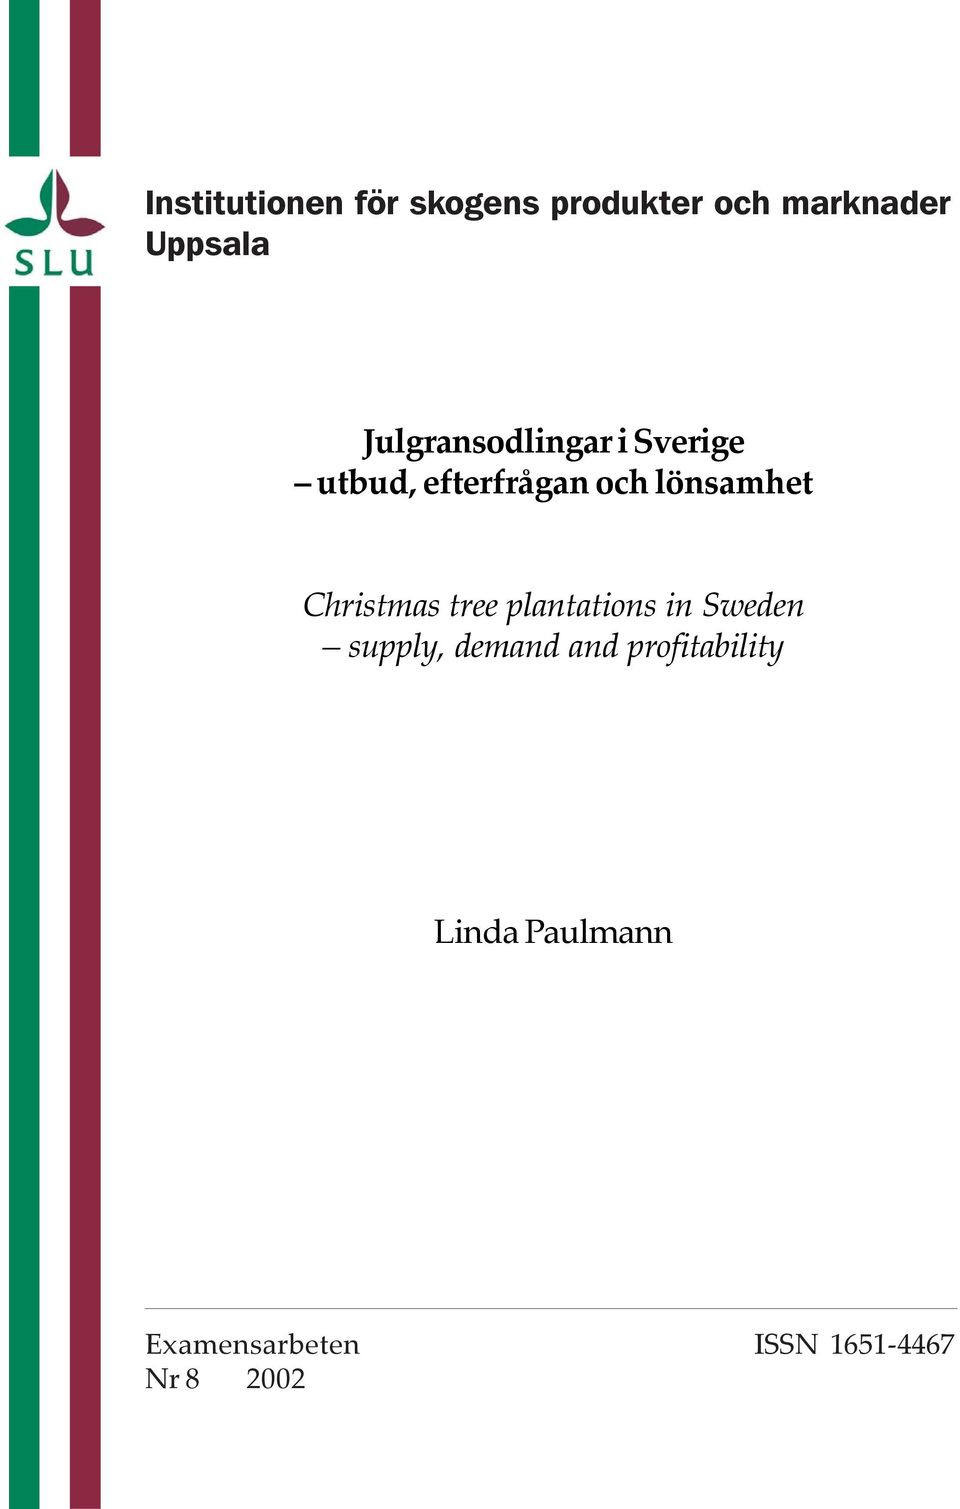 Christmas tree plantations in Sweden supply, demand and